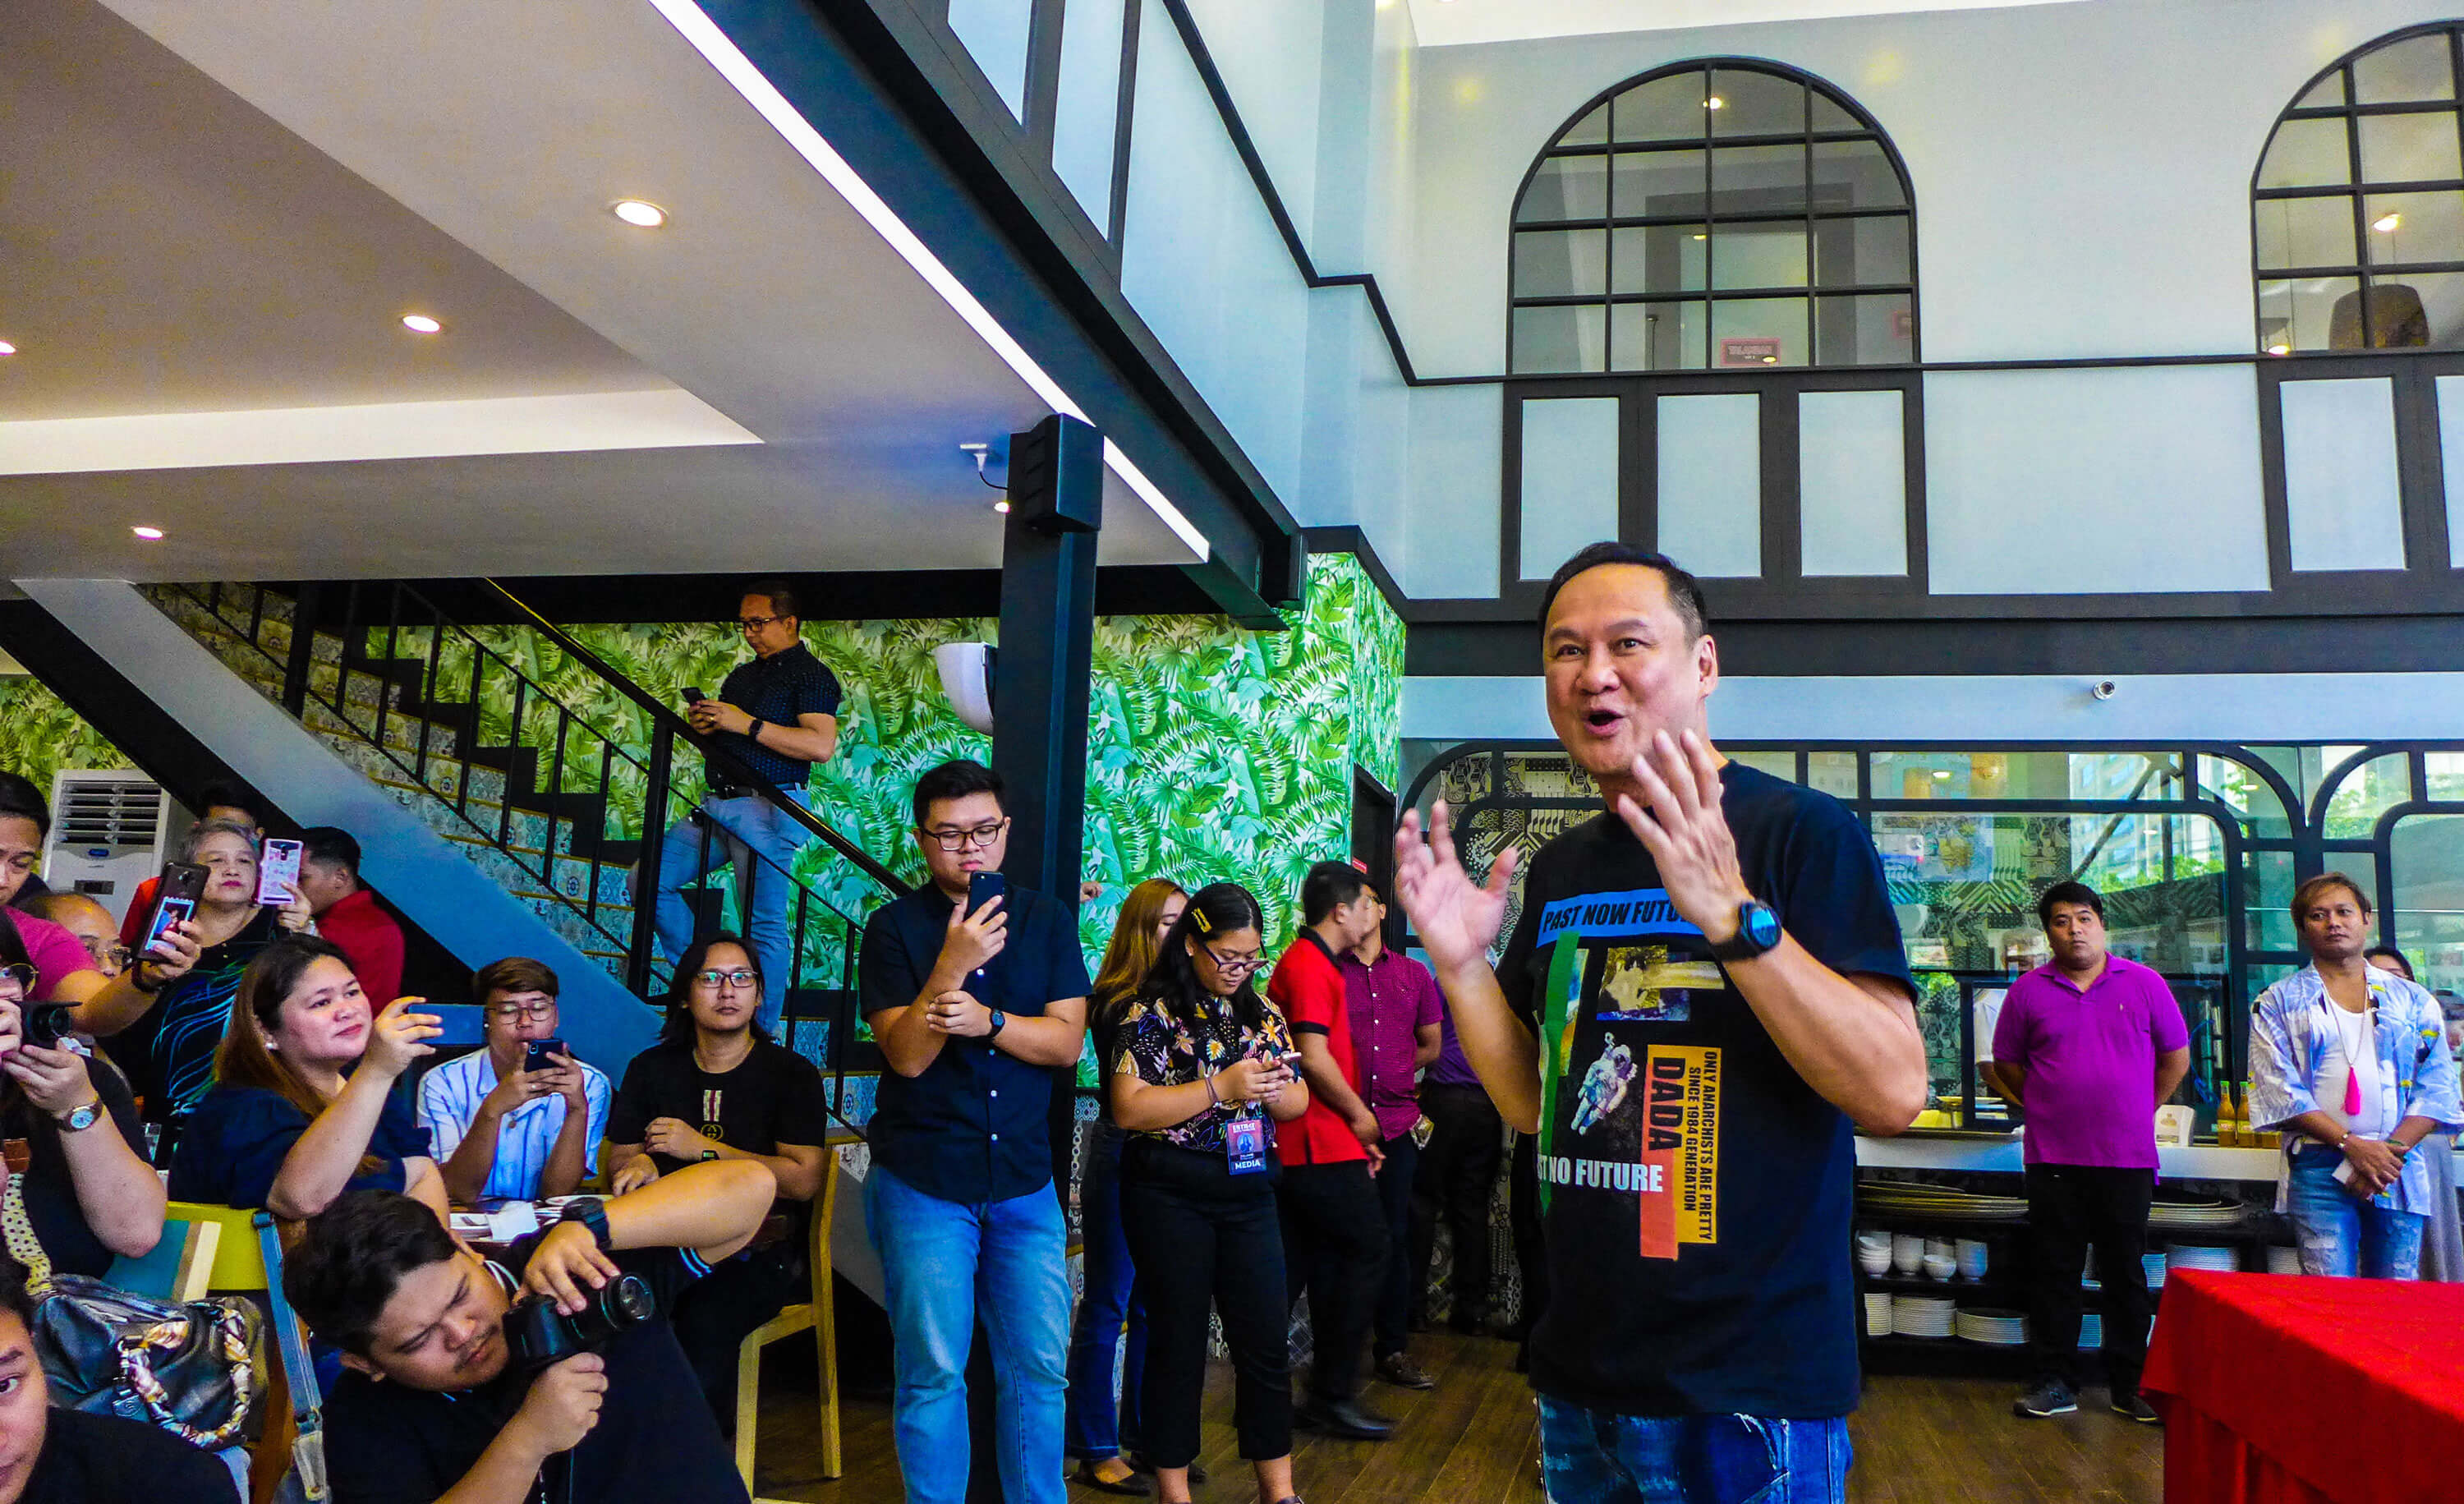 NEW OWNER, SAME LECHON QUALITY, TASTE. Meat Concepts Corporation President George N. Pua said in yesterday’s media preview that Rico’s Lechon has changed ownership but the quality and taste of its roasted pigs remain the same.